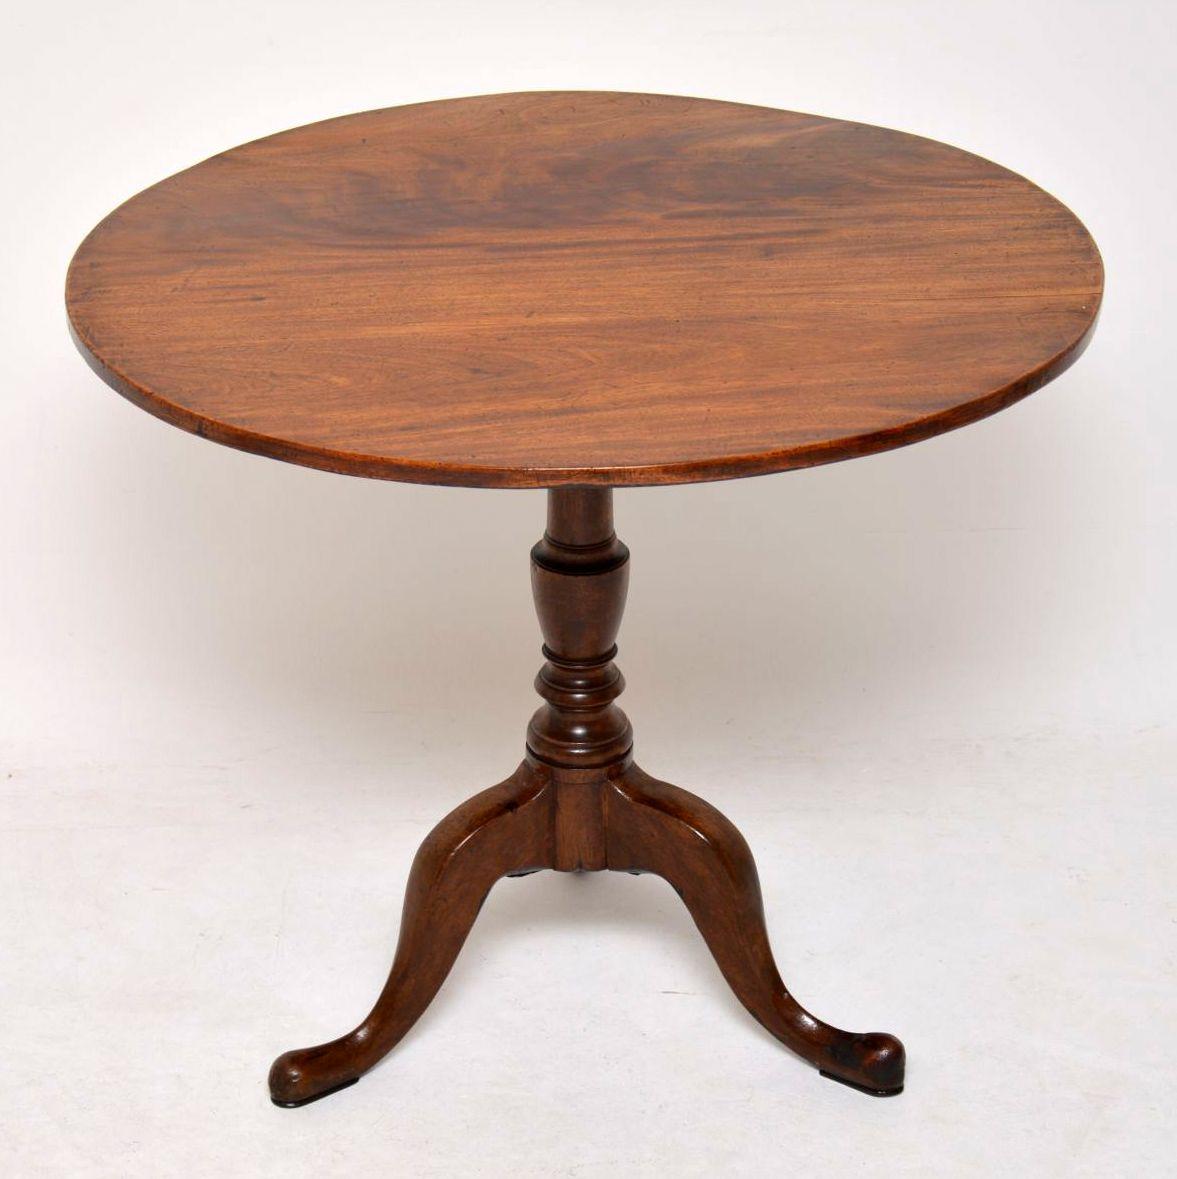 Antique George III solid mahogany tilt-top table in very good original condition. It has a circular top sitting on a turned base with tripod pad feet. The grain of the mahogany on the top is beautiful & it has a wonderful original patina. This table